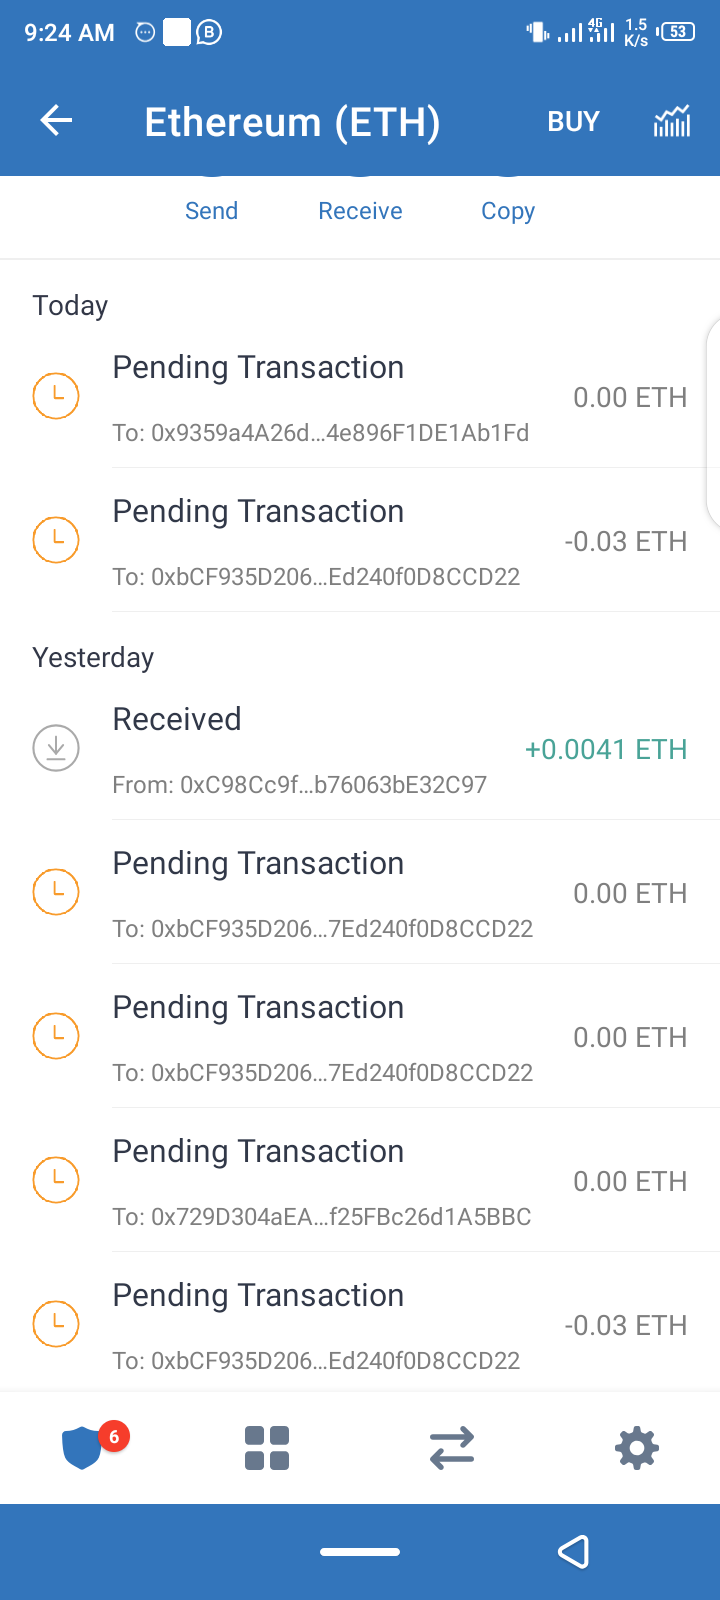 What can I do with a pending ETH transaction? - Atomic Wallet Knowledge Base